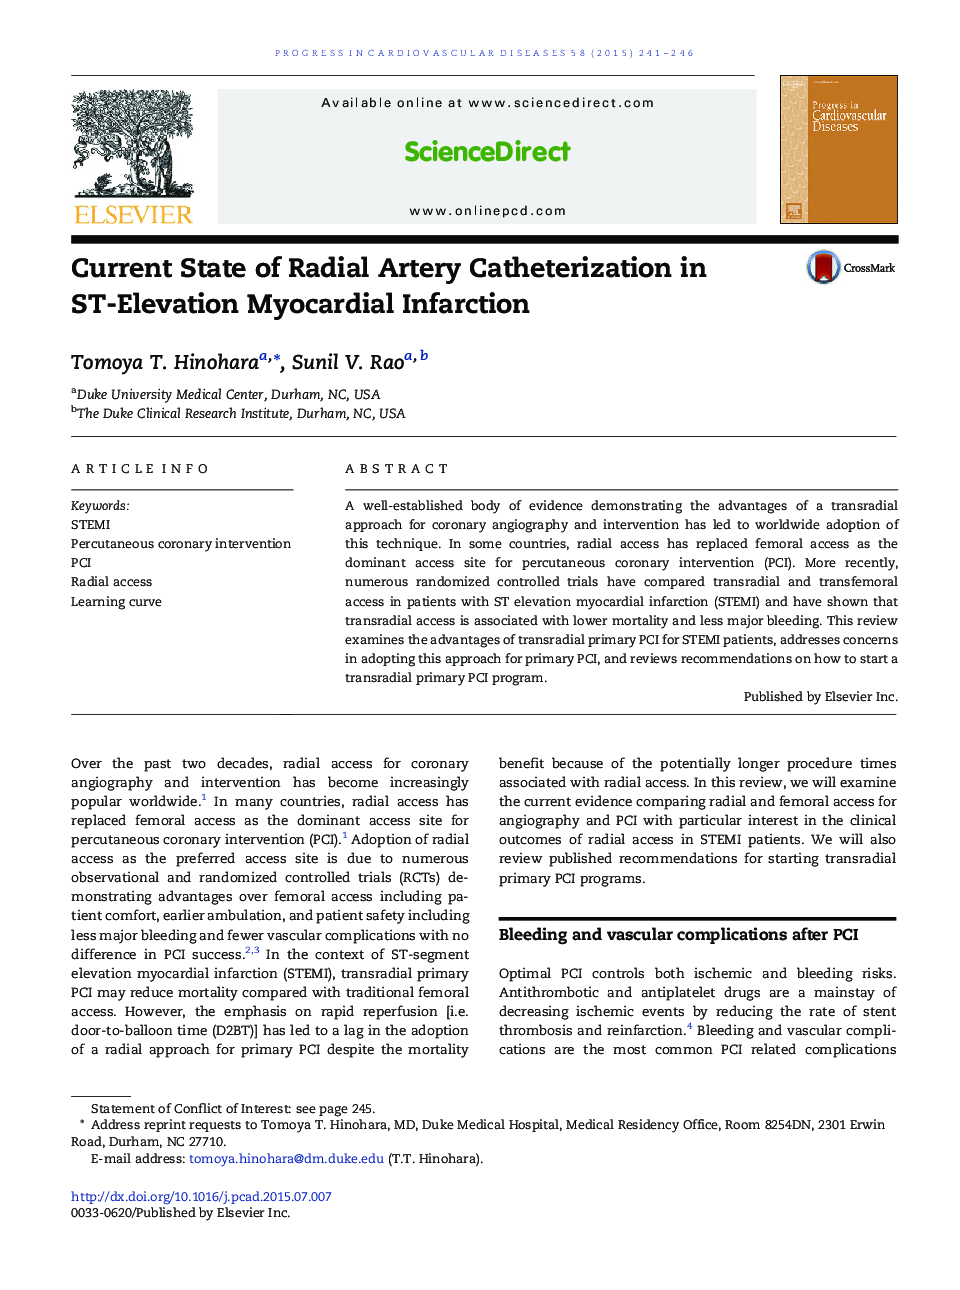 Current State of Radial Artery Catheterization in ST-Elevation Myocardial Infarction 